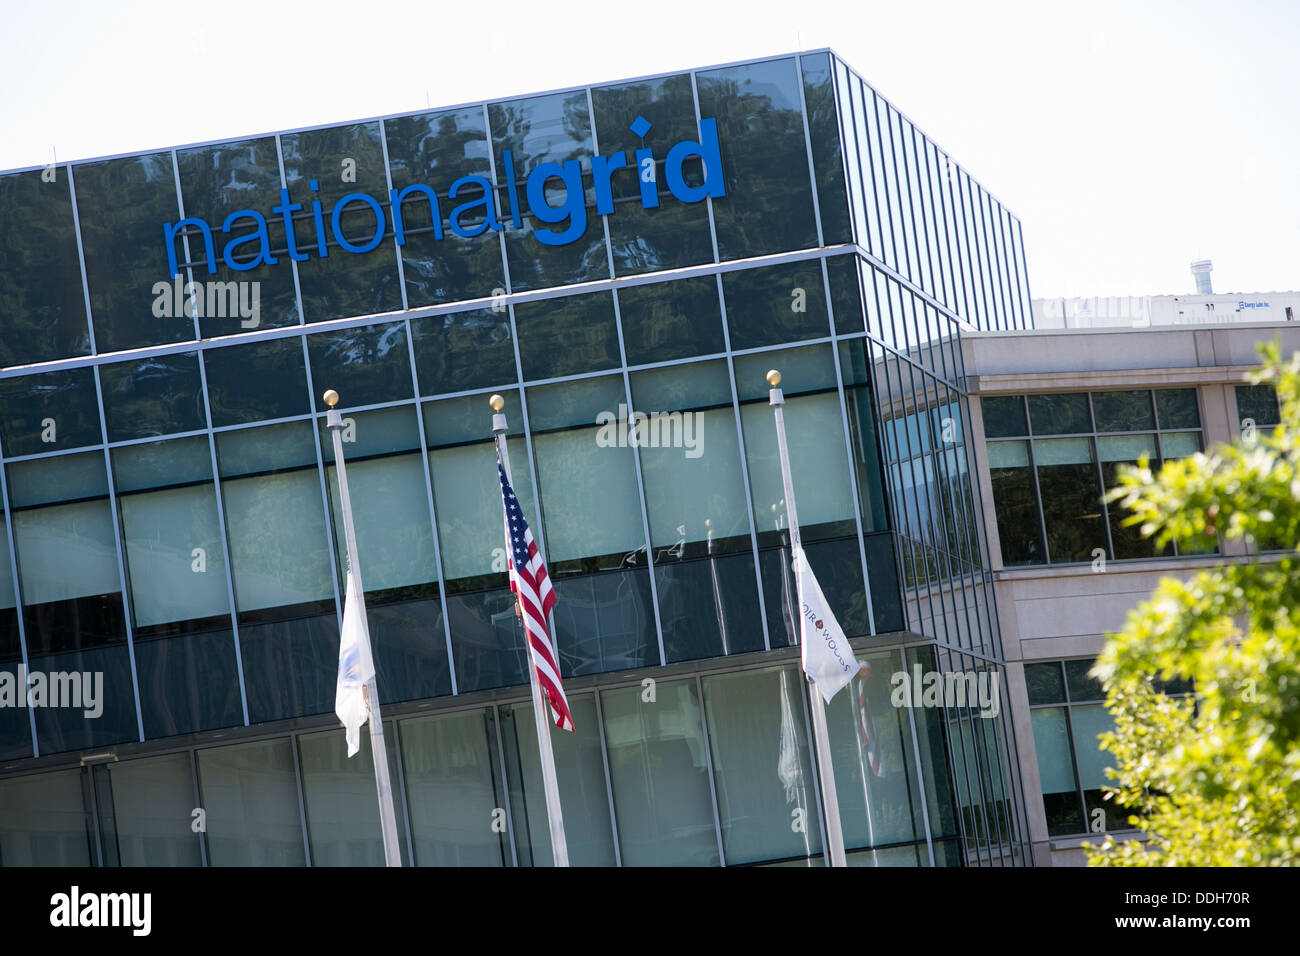 An office building occupied by National Grid. Stock Photo